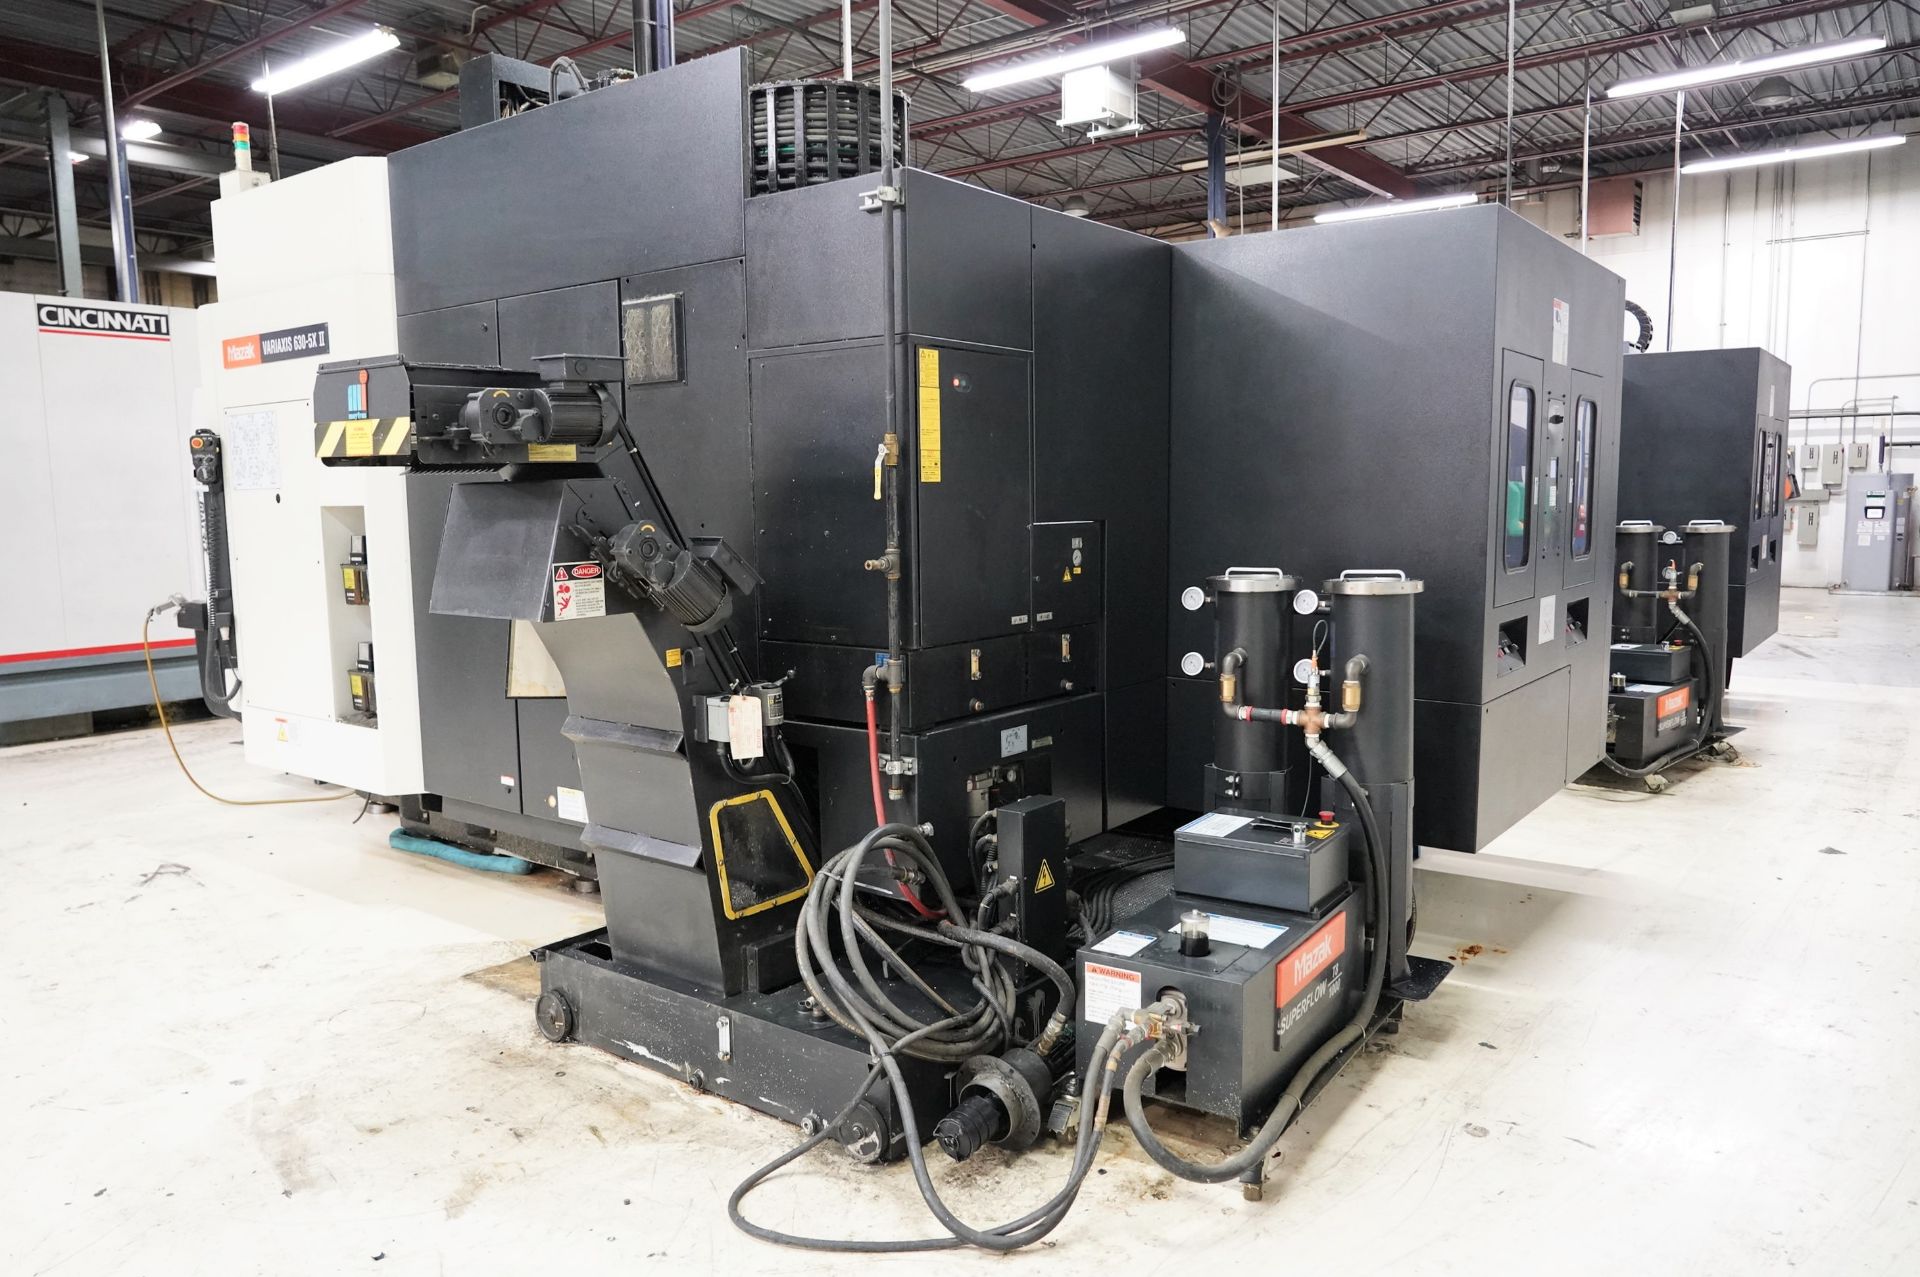 2008 Mazak Variax 630-5X-II 5-Axis CNC Vertical Machining Center With Trunnion Table, Pallet Changer - Image 10 of 17